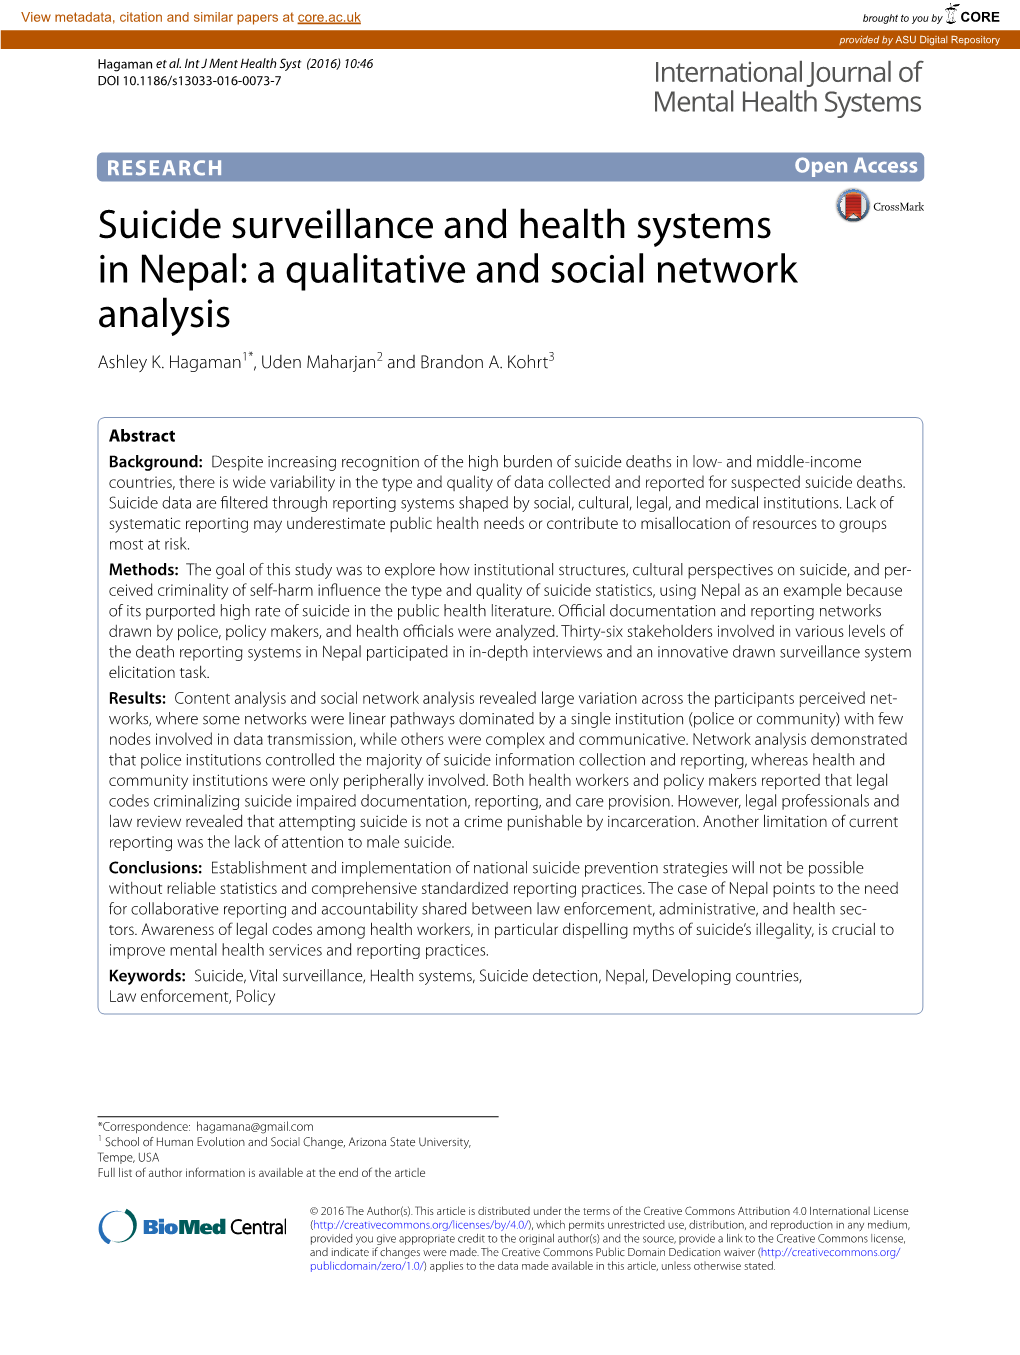 Suicide Surveillance and Health Systems in Nepal: a Qualitative and Social Network Analysis Ashley K